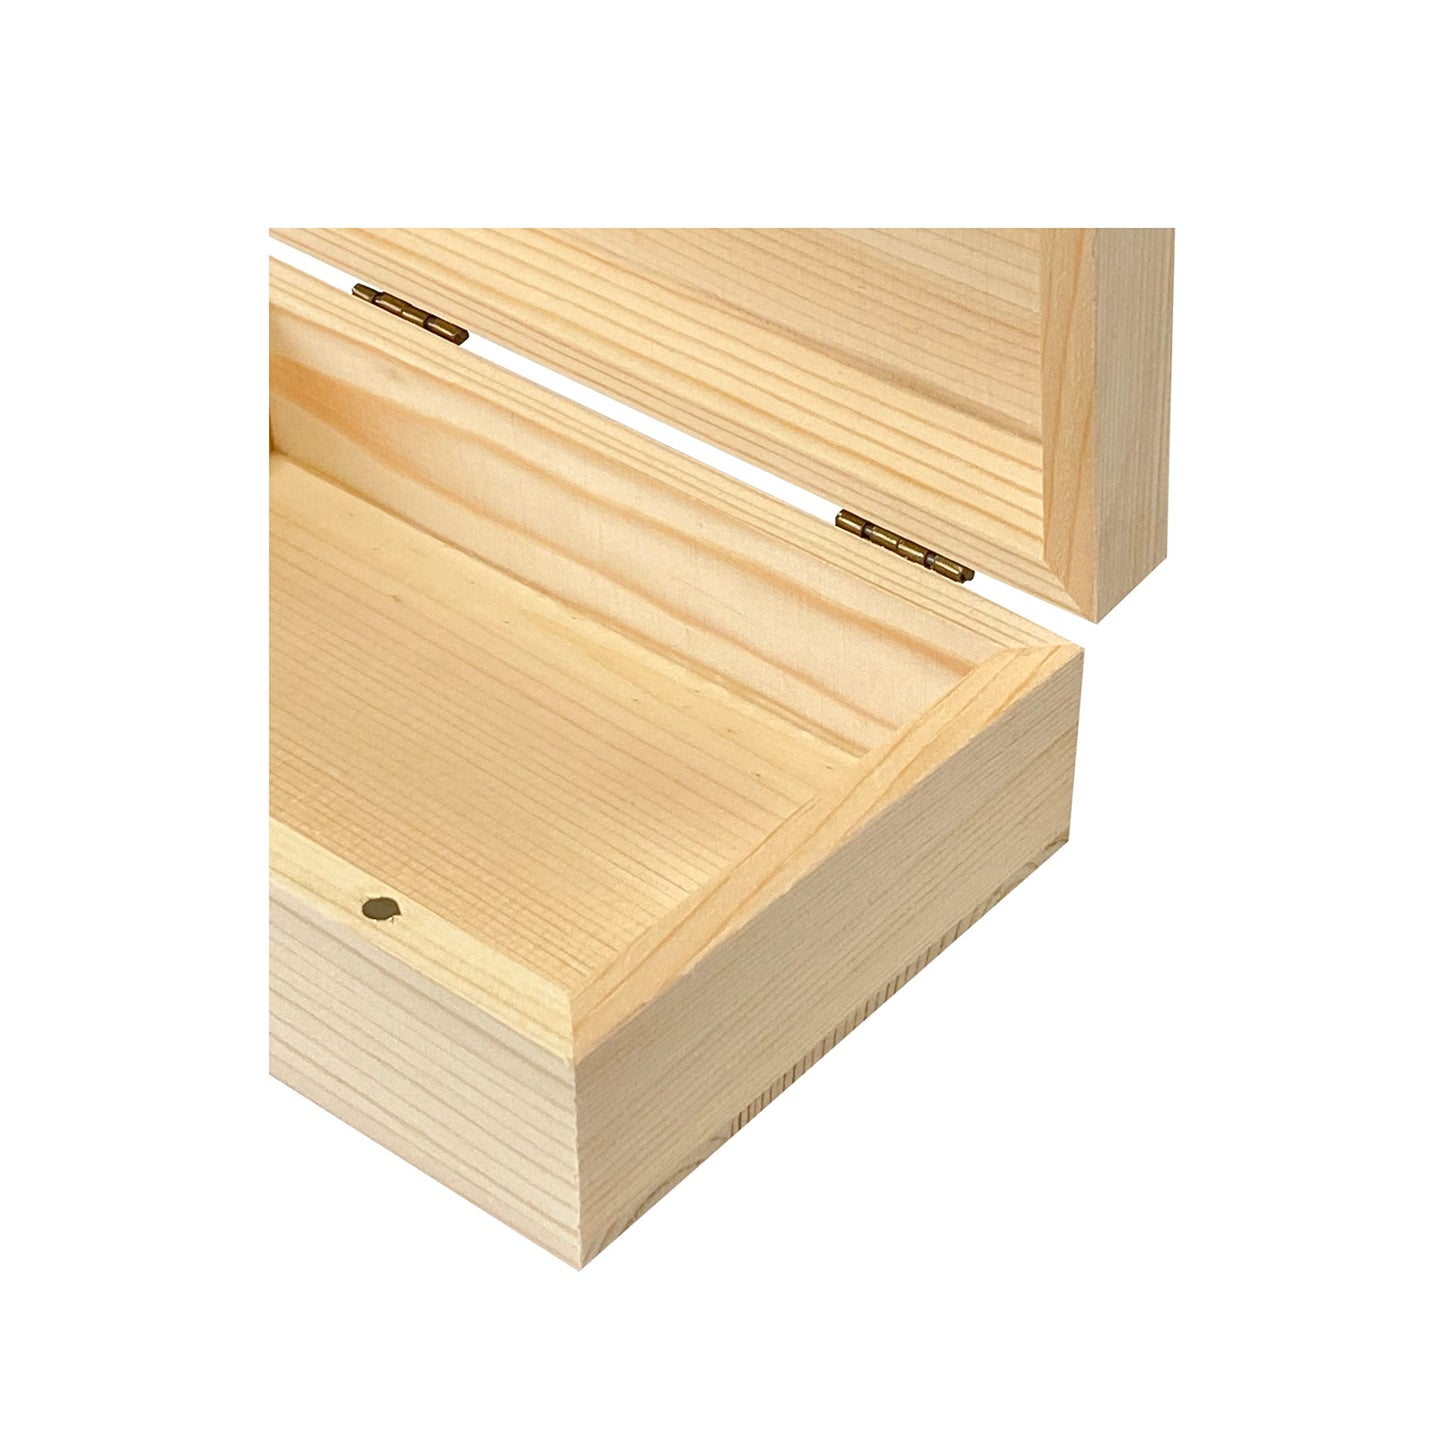 Cregugua 6-Pack Wooden Box Unfinished Rectangle Pine Wood Box for Crafts,Magnetic Hinged Lid (5.5 x 3.5 x 1.9 in)